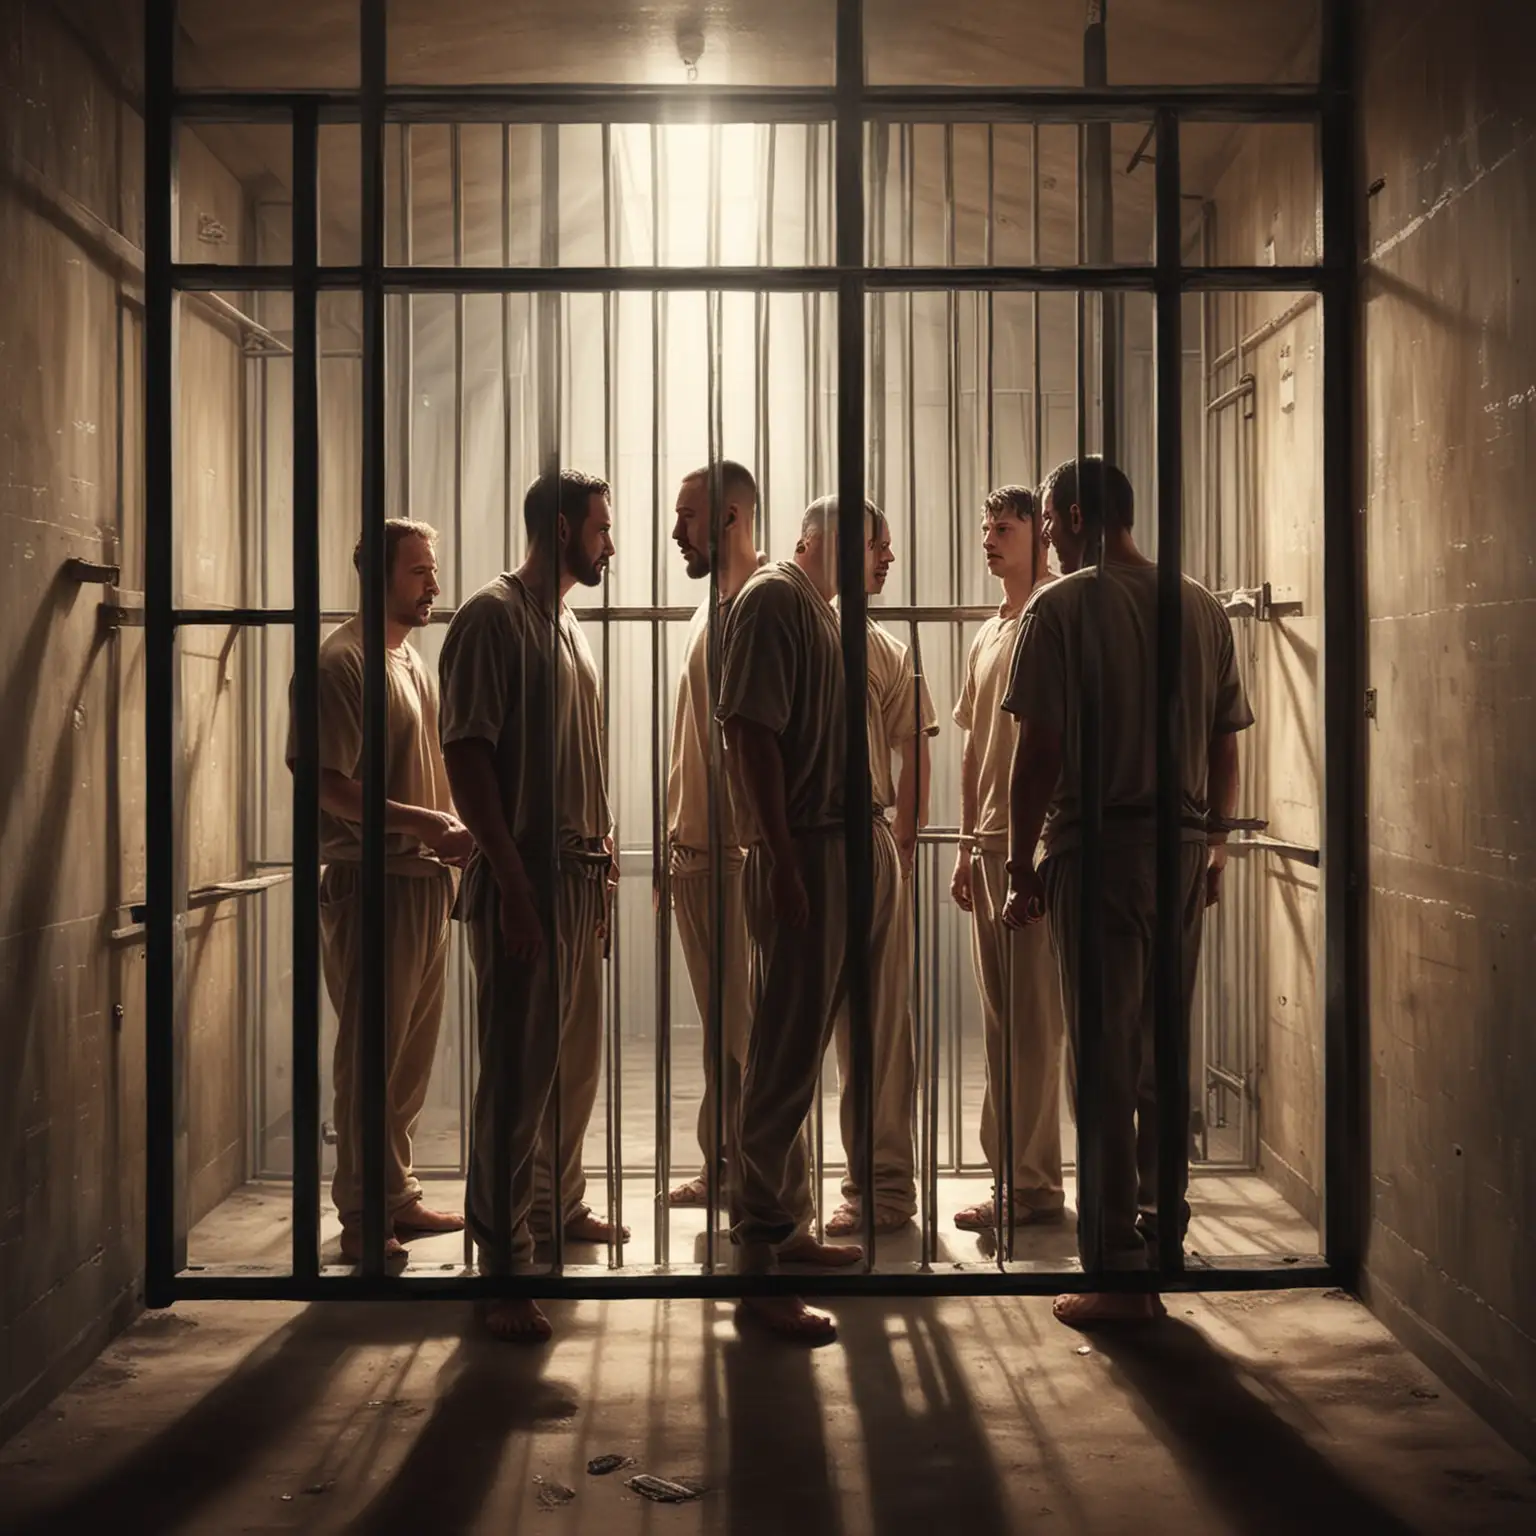 Prisoners in Cell with Light Streaming Through Bars